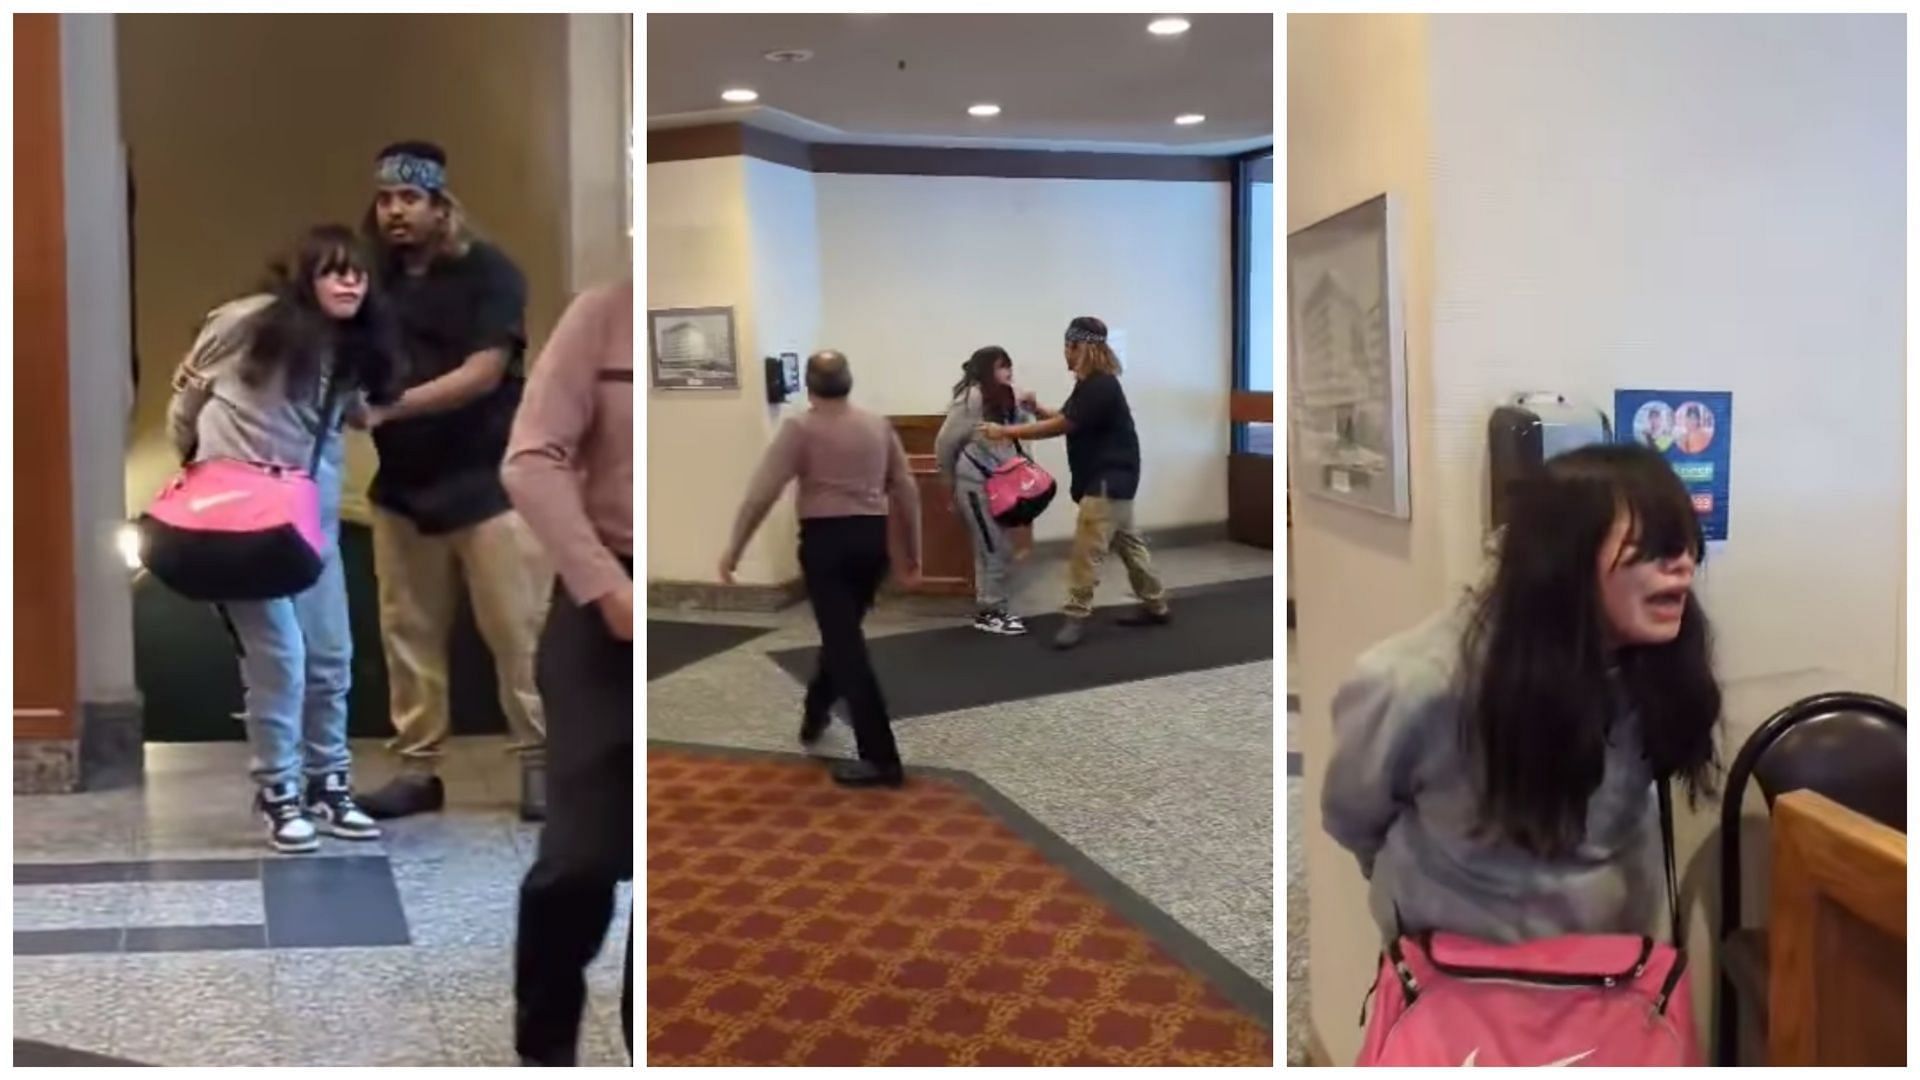 Distressing video of indigenous woman restrained in a Winnipeg hotel spurs social media outrage (Image via Facebook/Eddy Barahona)